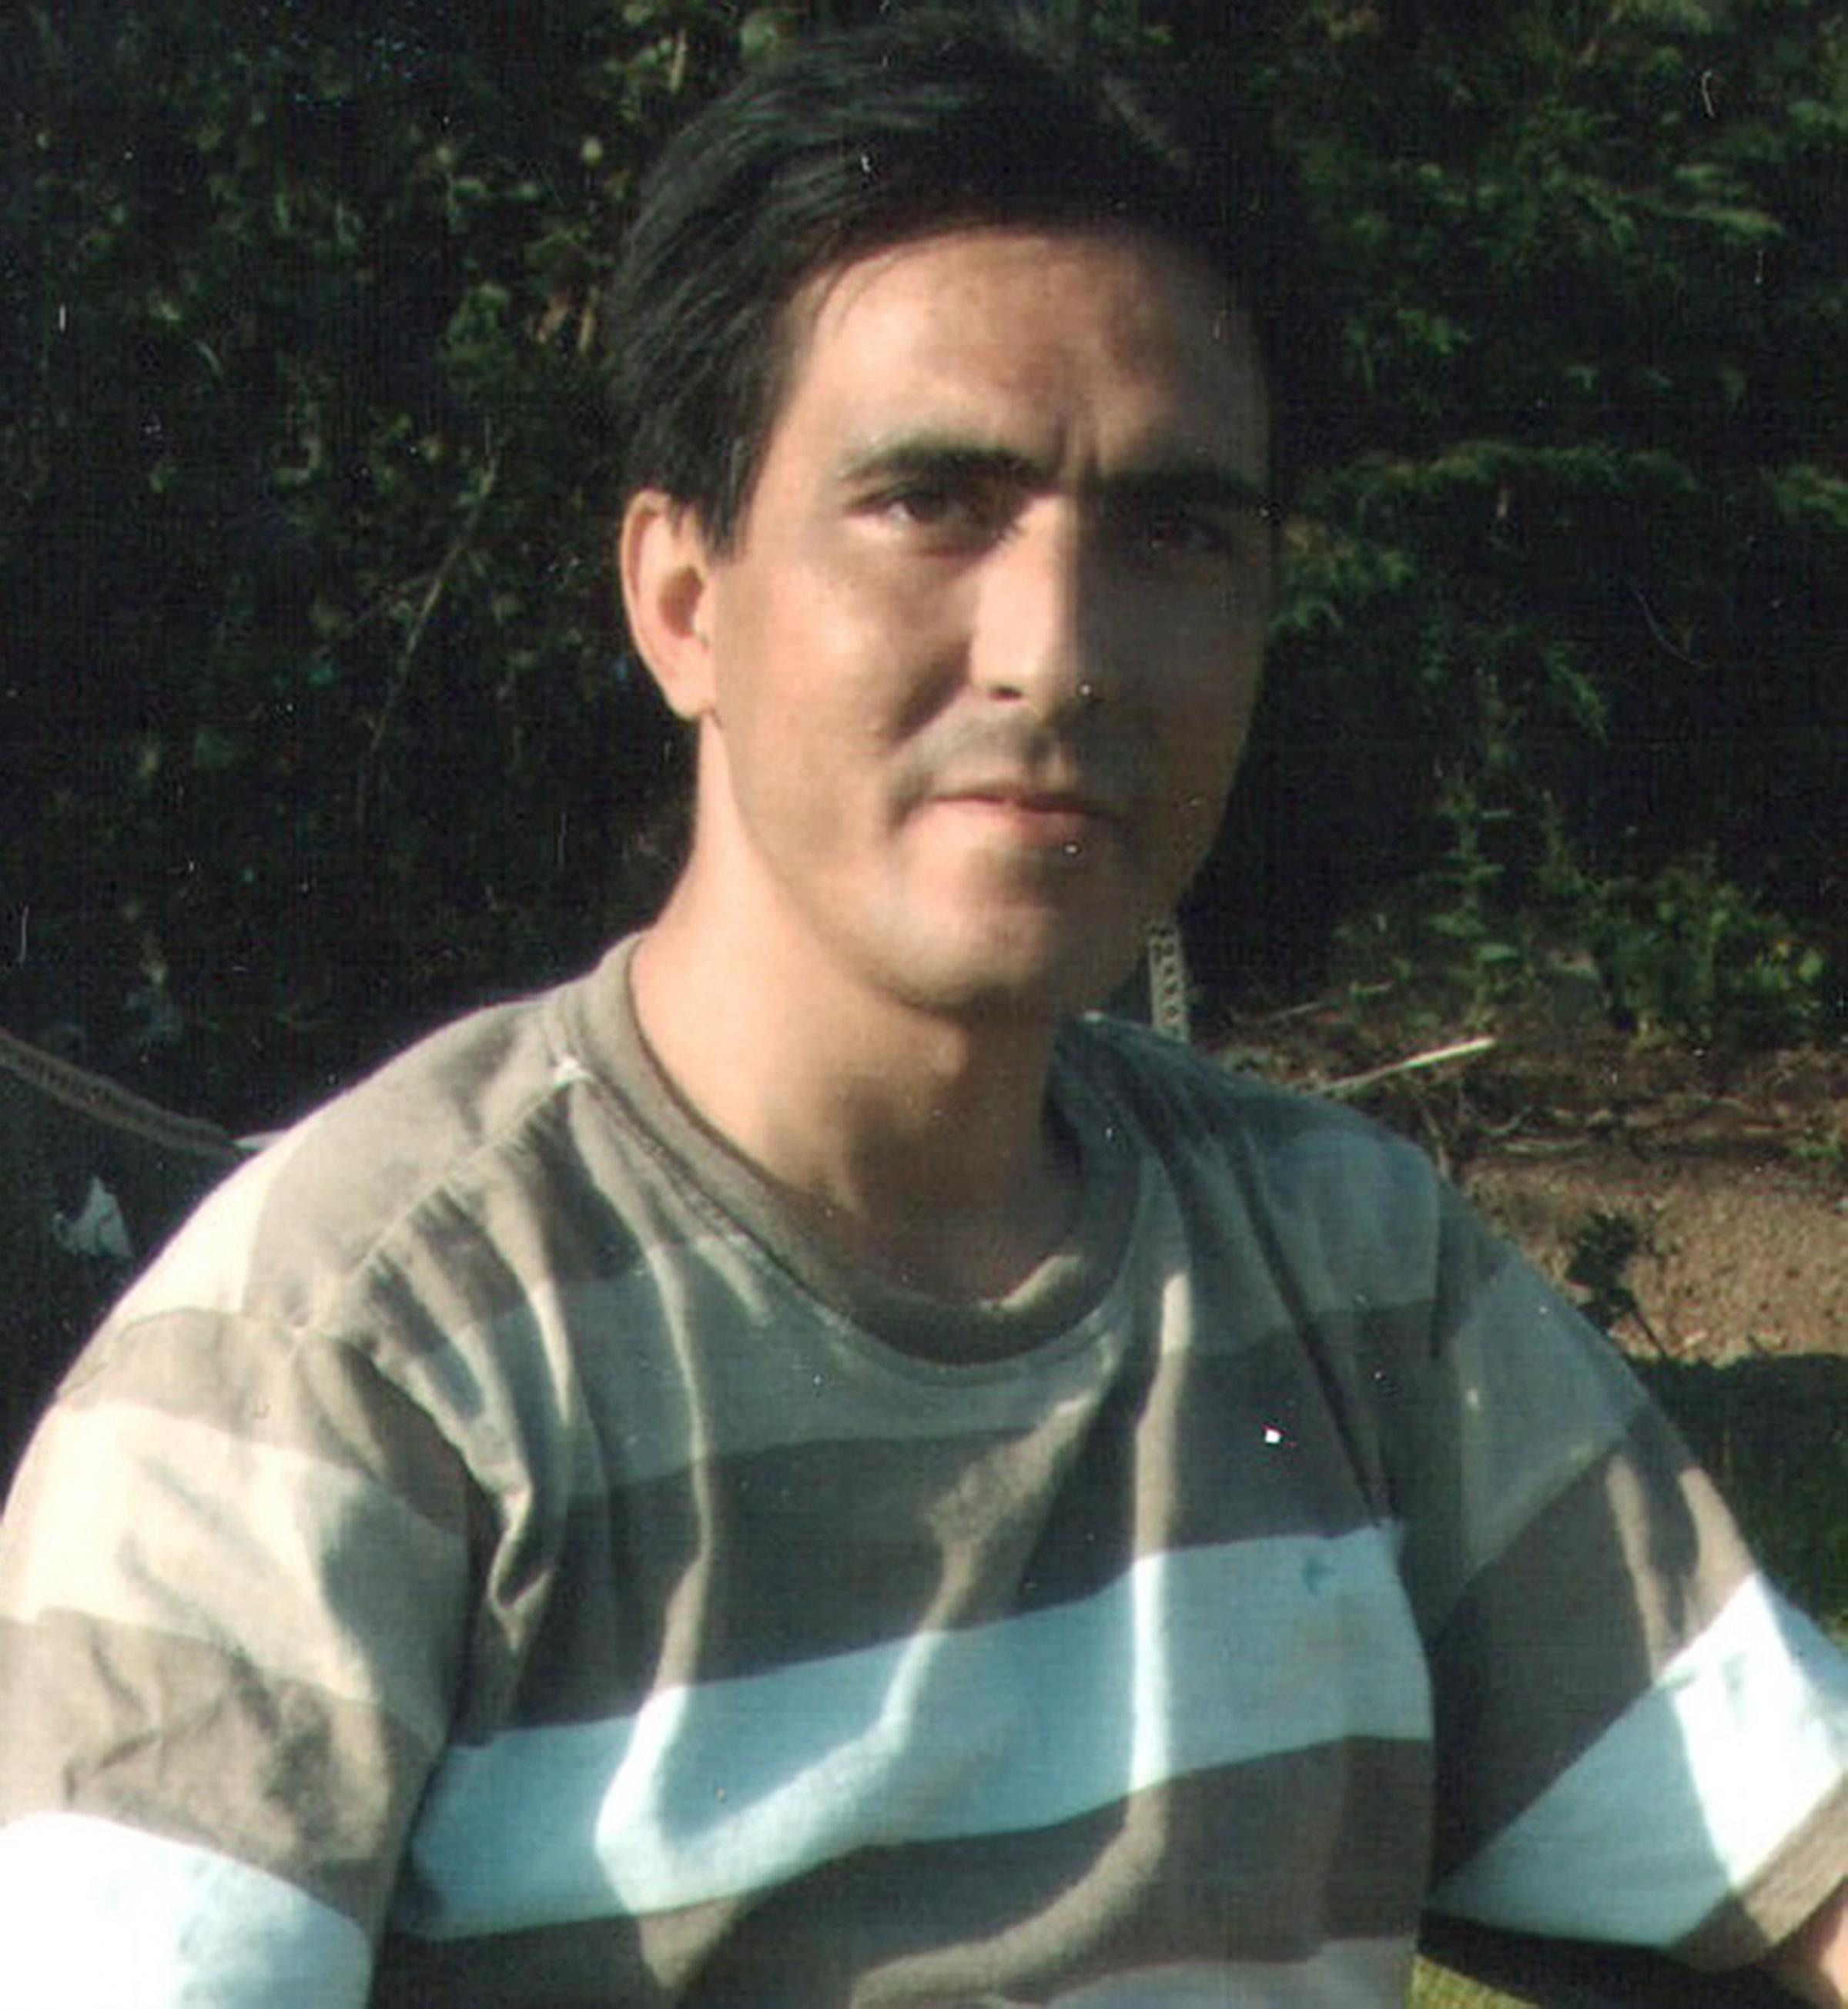 Bijan Ebrahimi: a police force and council repeatedly sided with the abusers of Bijan, who was murdered after being wrongly accused of being paedophile, a report has found